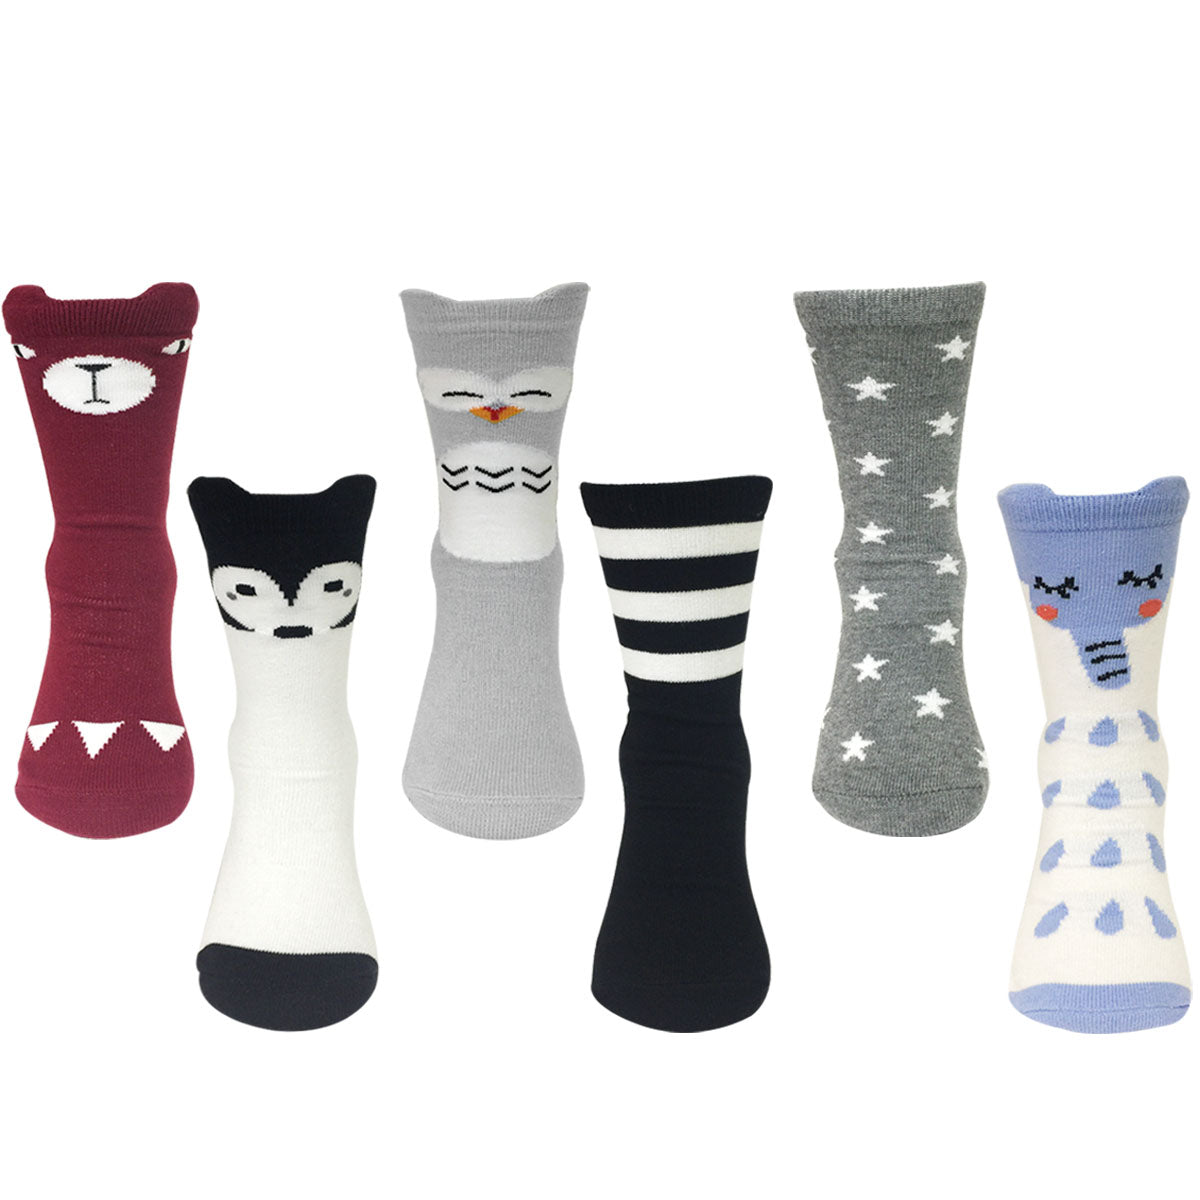 Wrapables My Best Buddy Socks for Baby (Set of 6), Nocturnal Friends